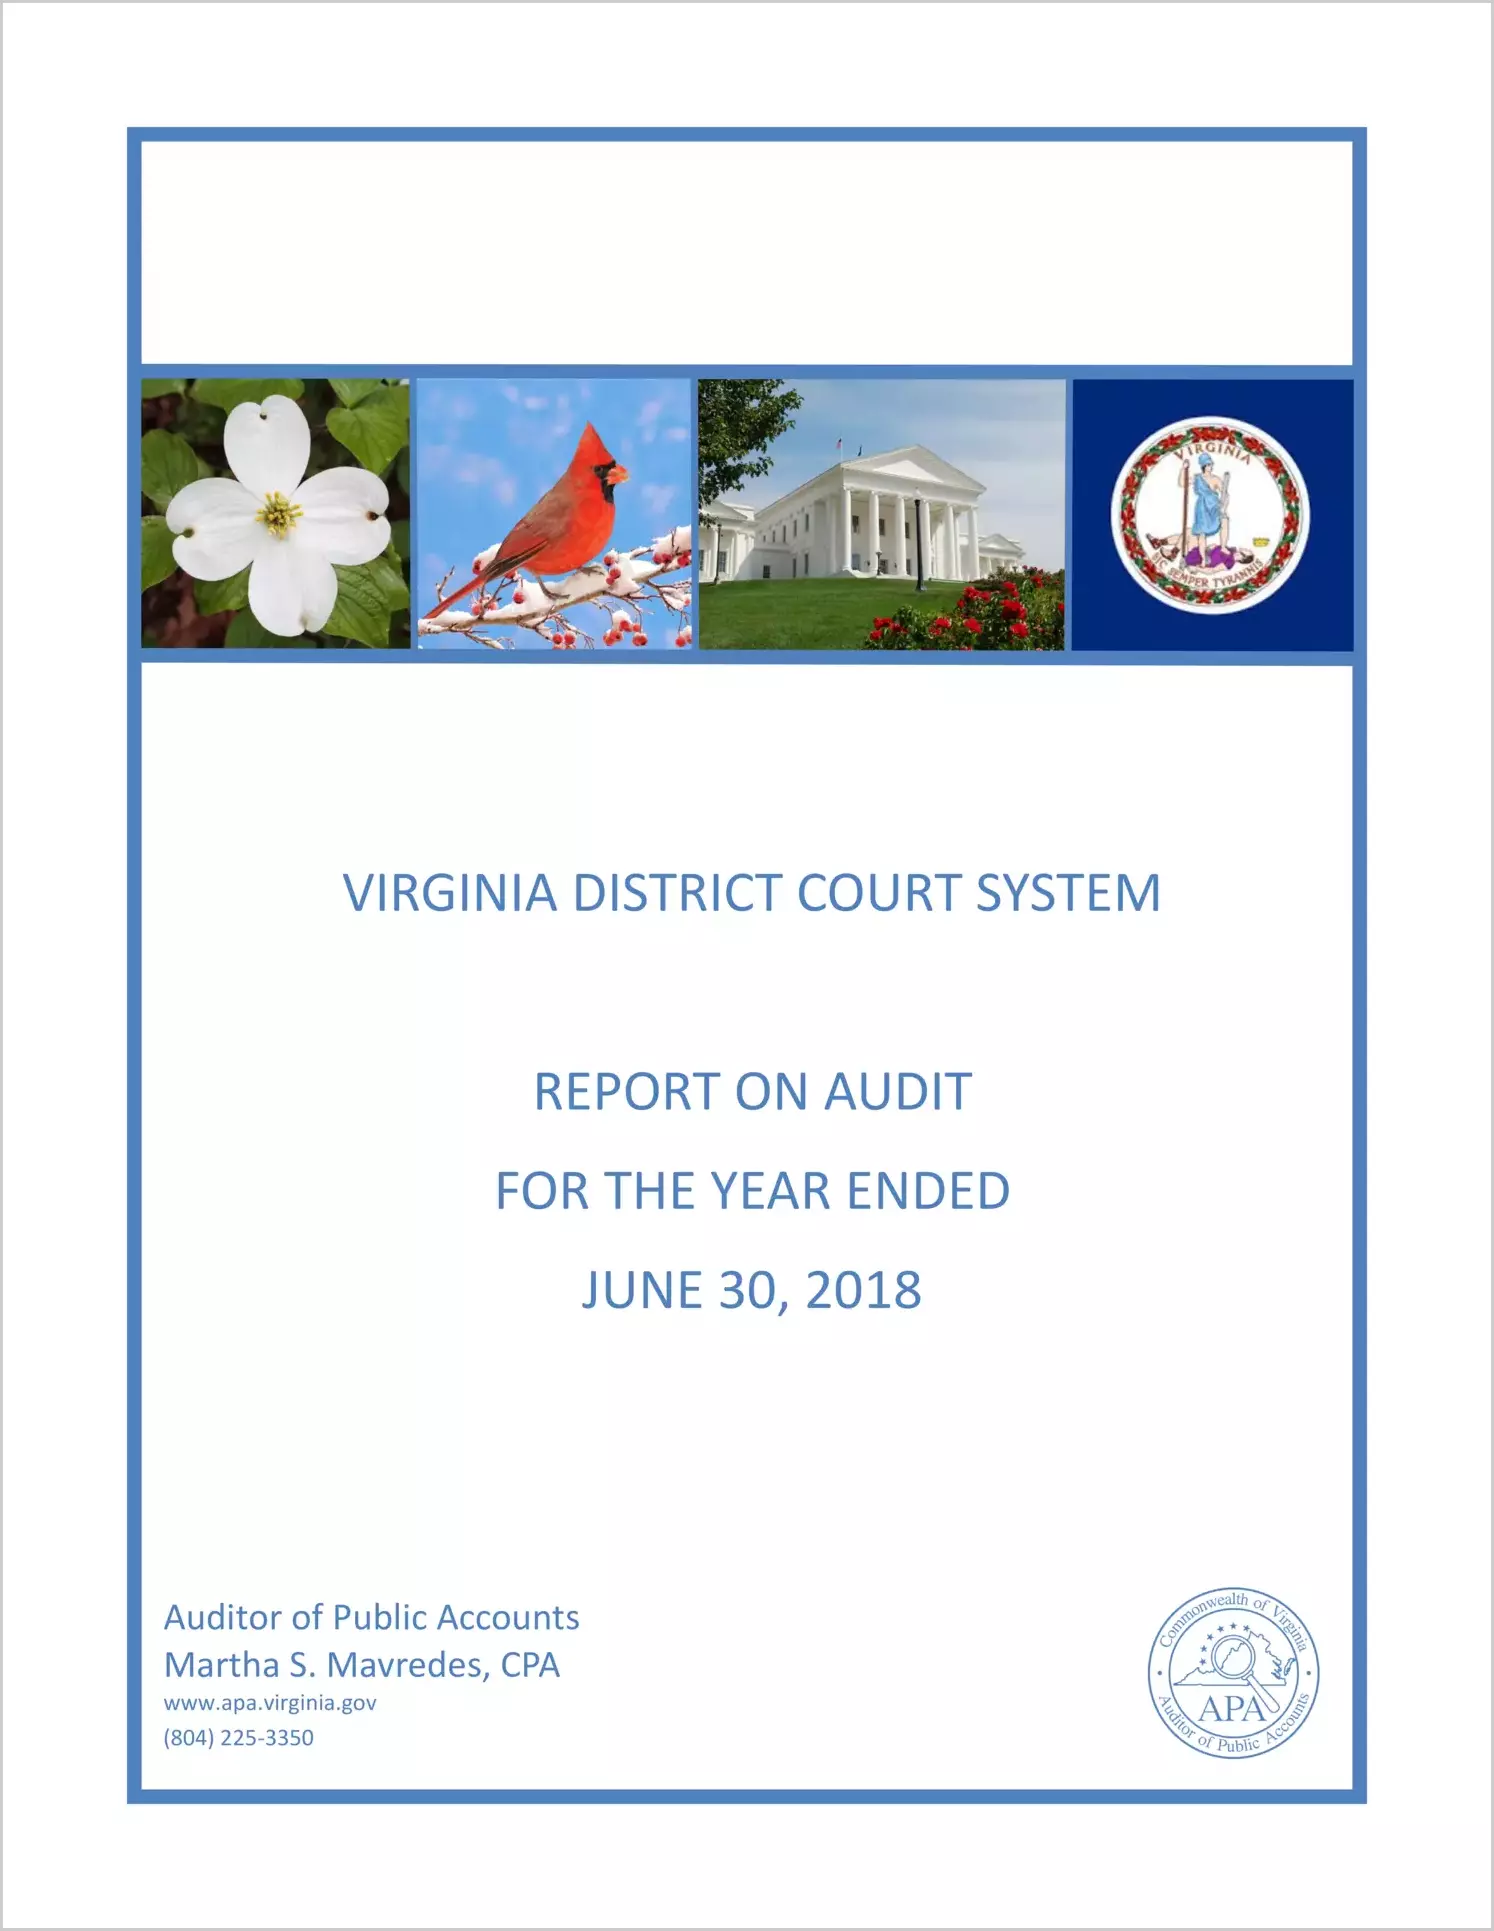 Virginia District Court System for the year ended June 30, 2018